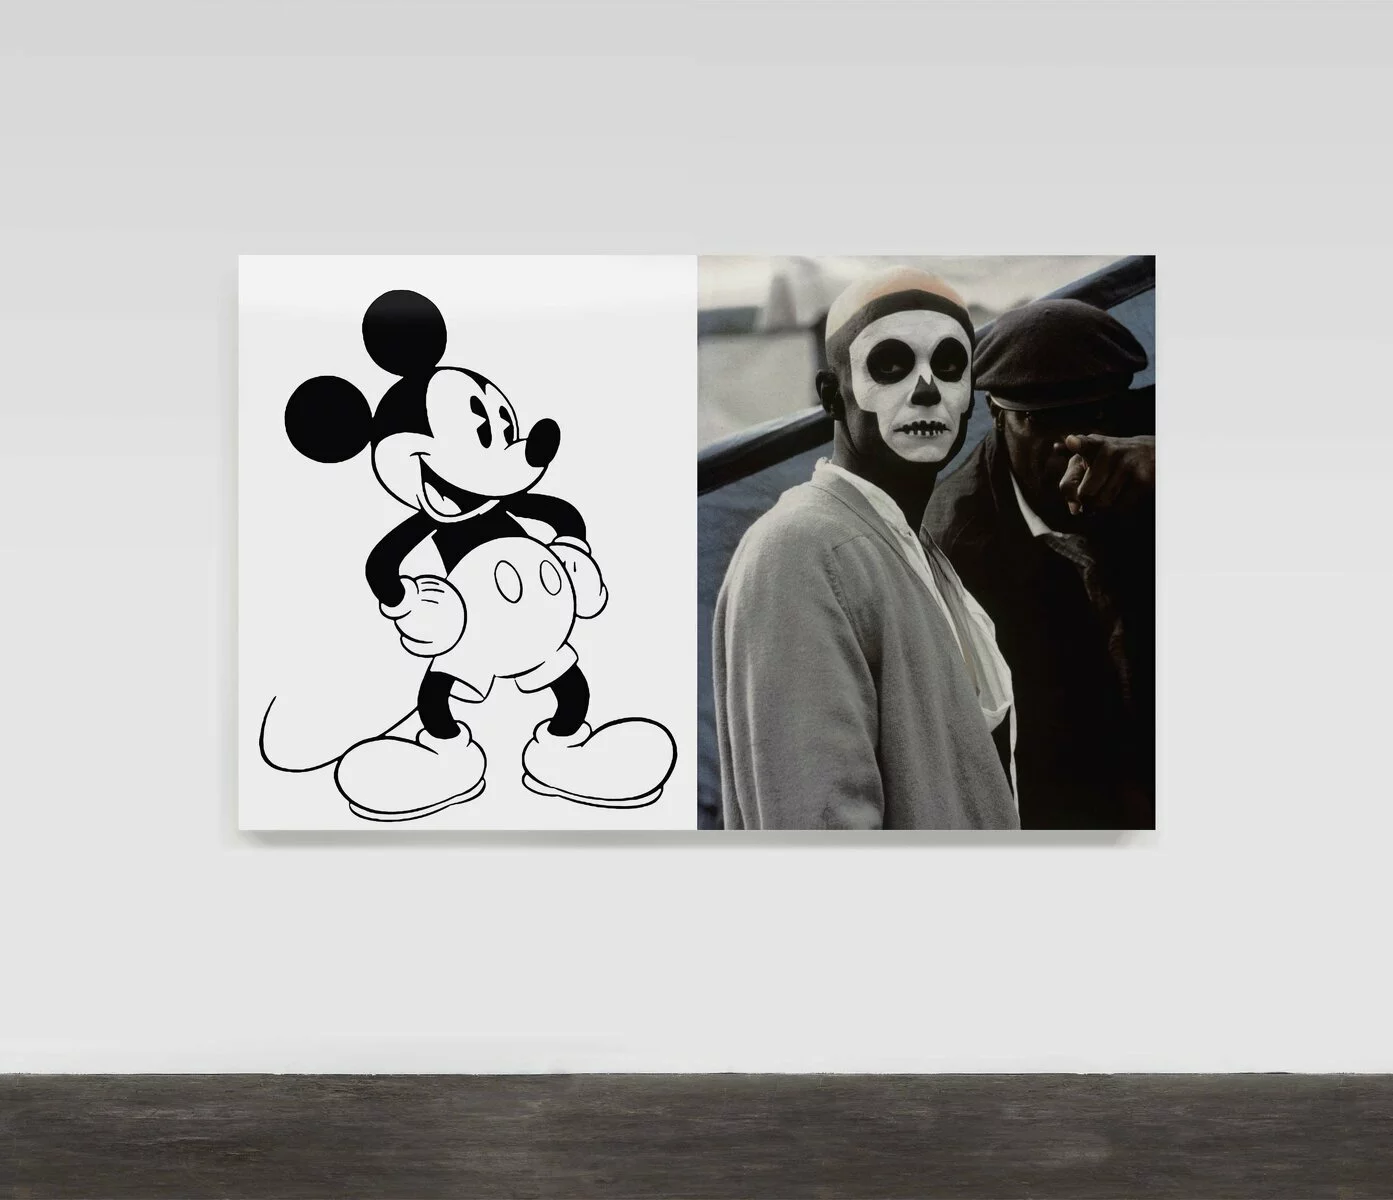 Artwork installed on a white wall. The left side of the artwork is a black and white illustration of Mickey Mouse. The right side of the artwork is a black and white photo of a person with skull makeup on their face.